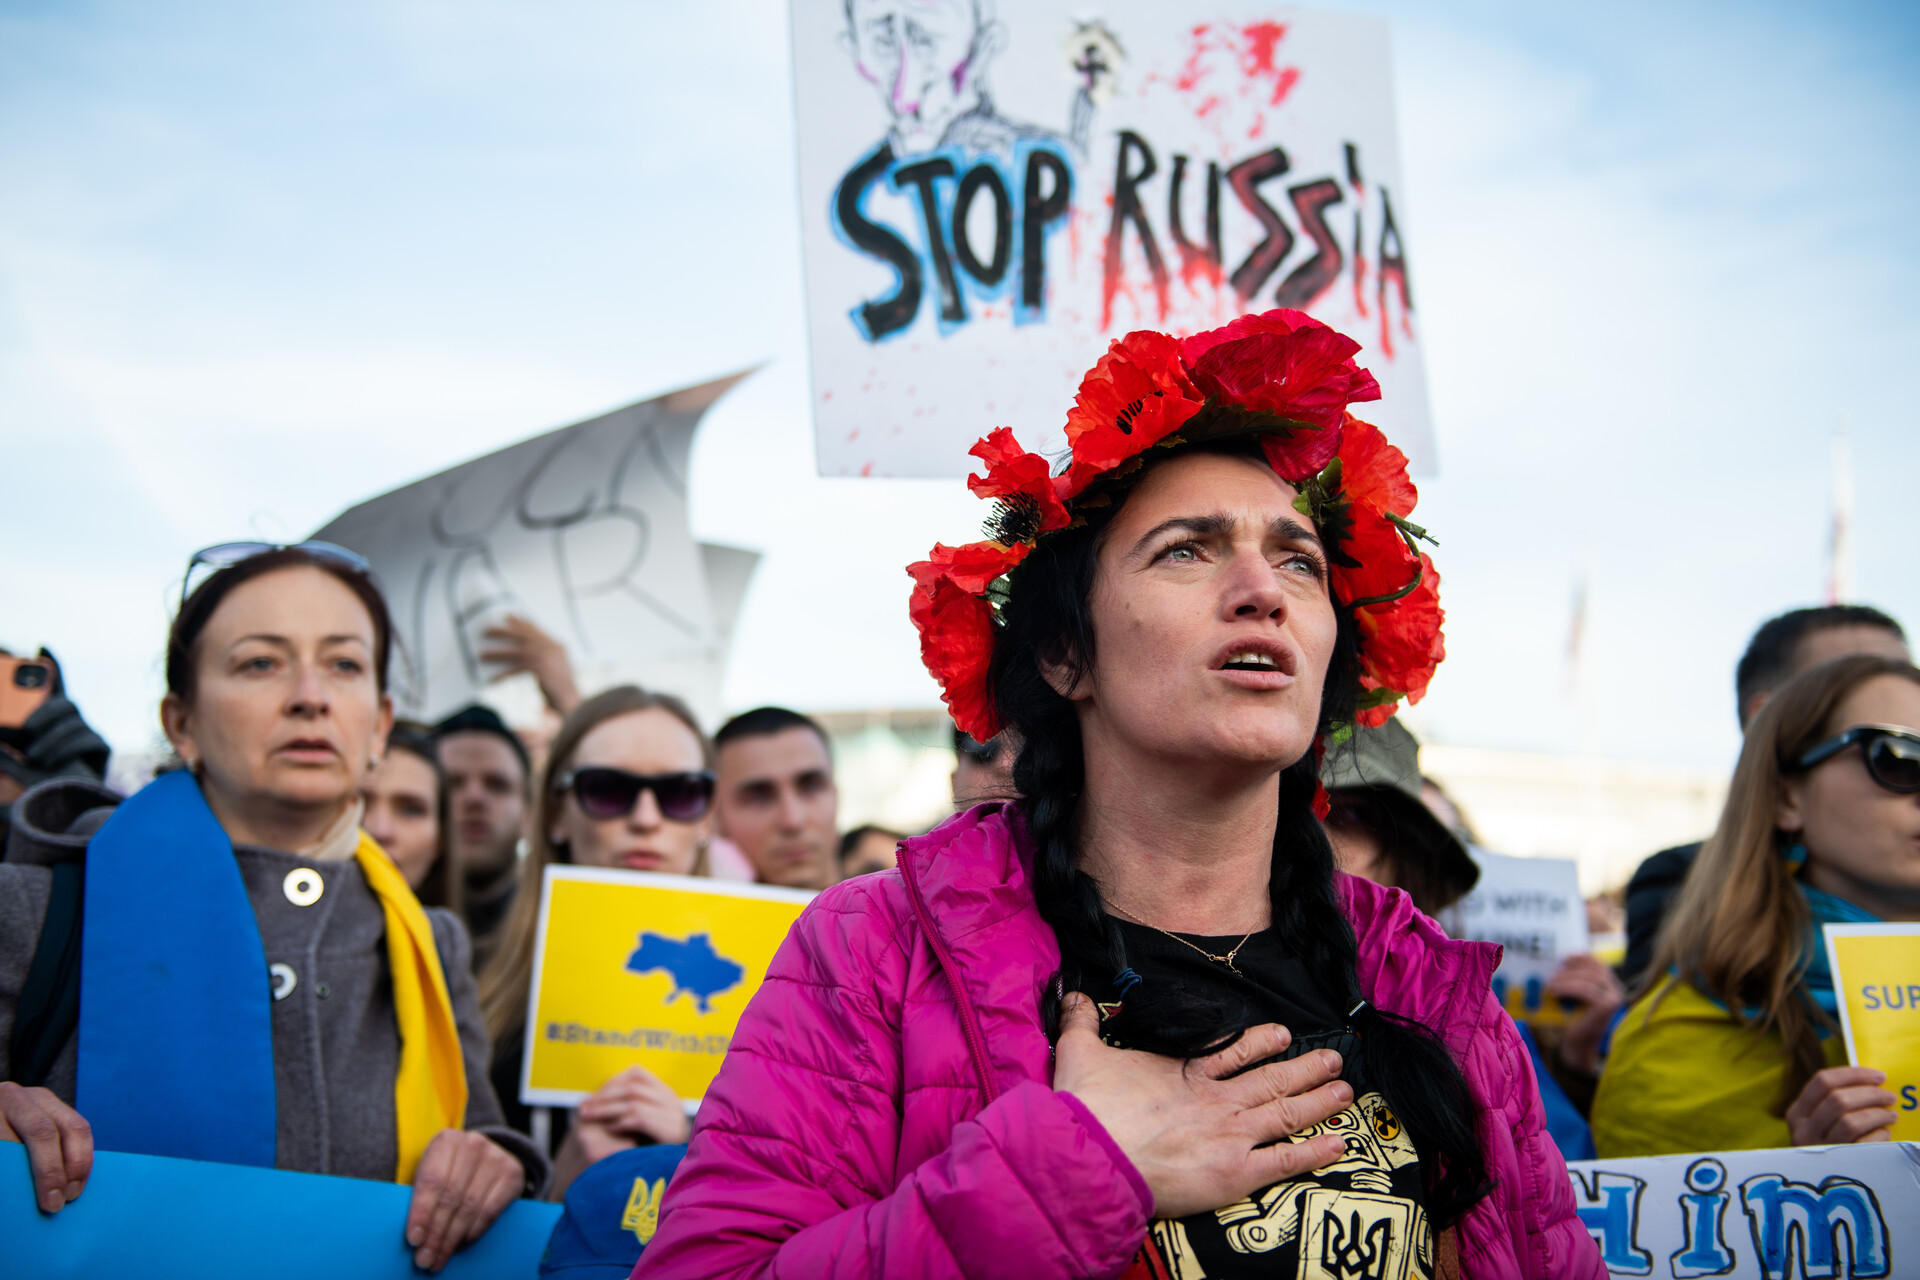 A woman with light skin stands in a crowd of protesters, wearing a pink jacket. A crown of red flowers is on top of her head, and she is holding her right hand to her chest and appears to be singing. A sign saying 